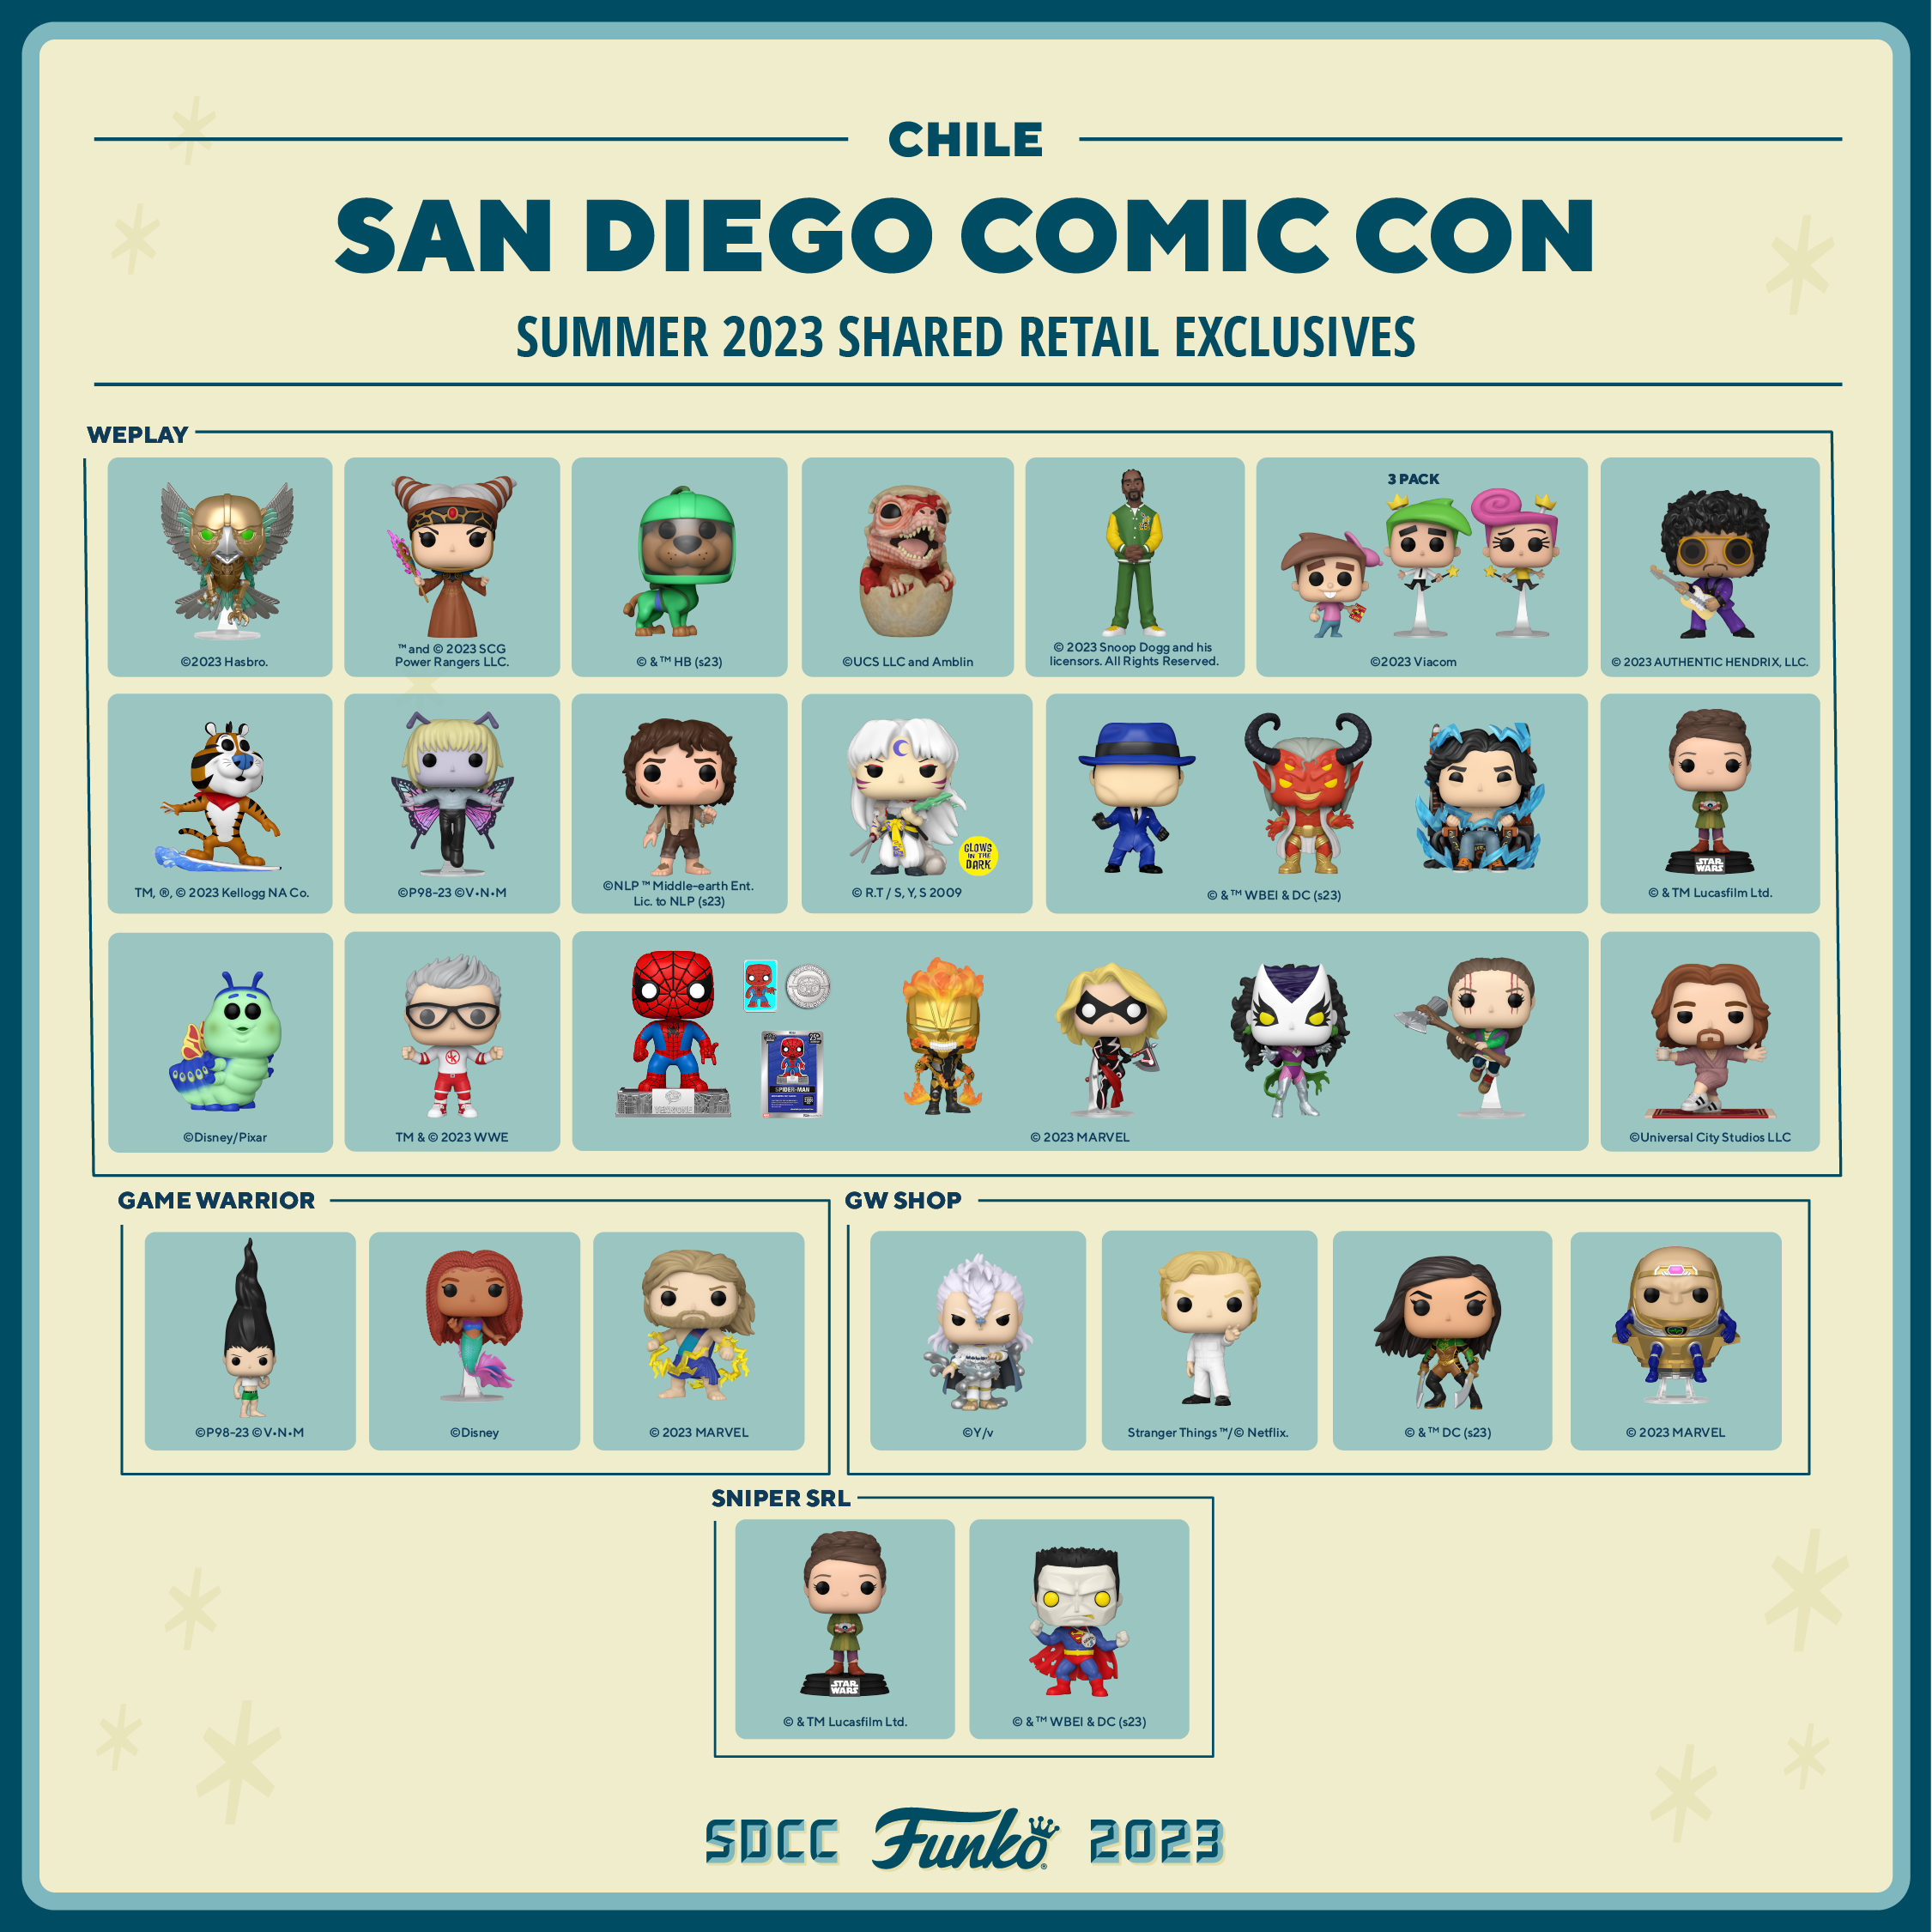 This just in from the Funkoville Visitor's Center, here is the 2023 SDCC Shared Retailer Guide for Chile!